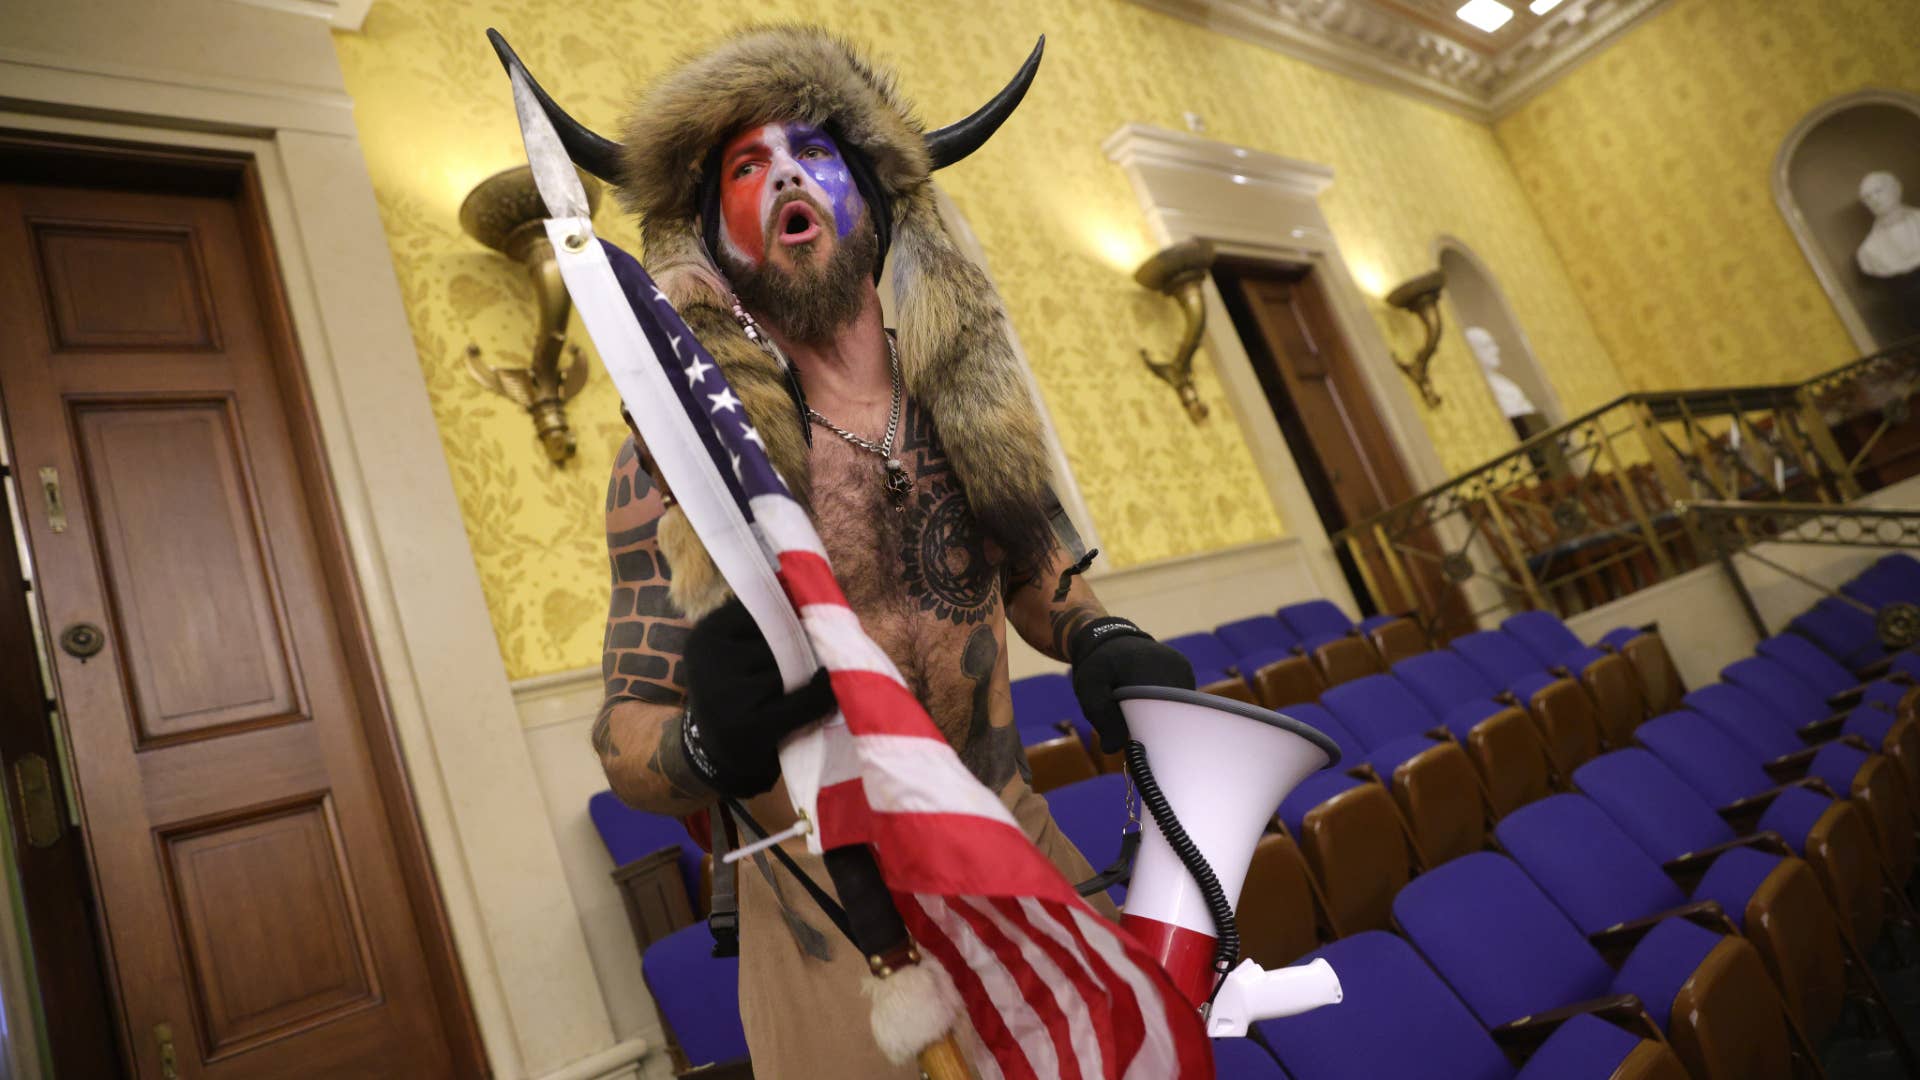 Protester screams "Freedom" inside the Senate chamber after the U.S. Capitol was breached.